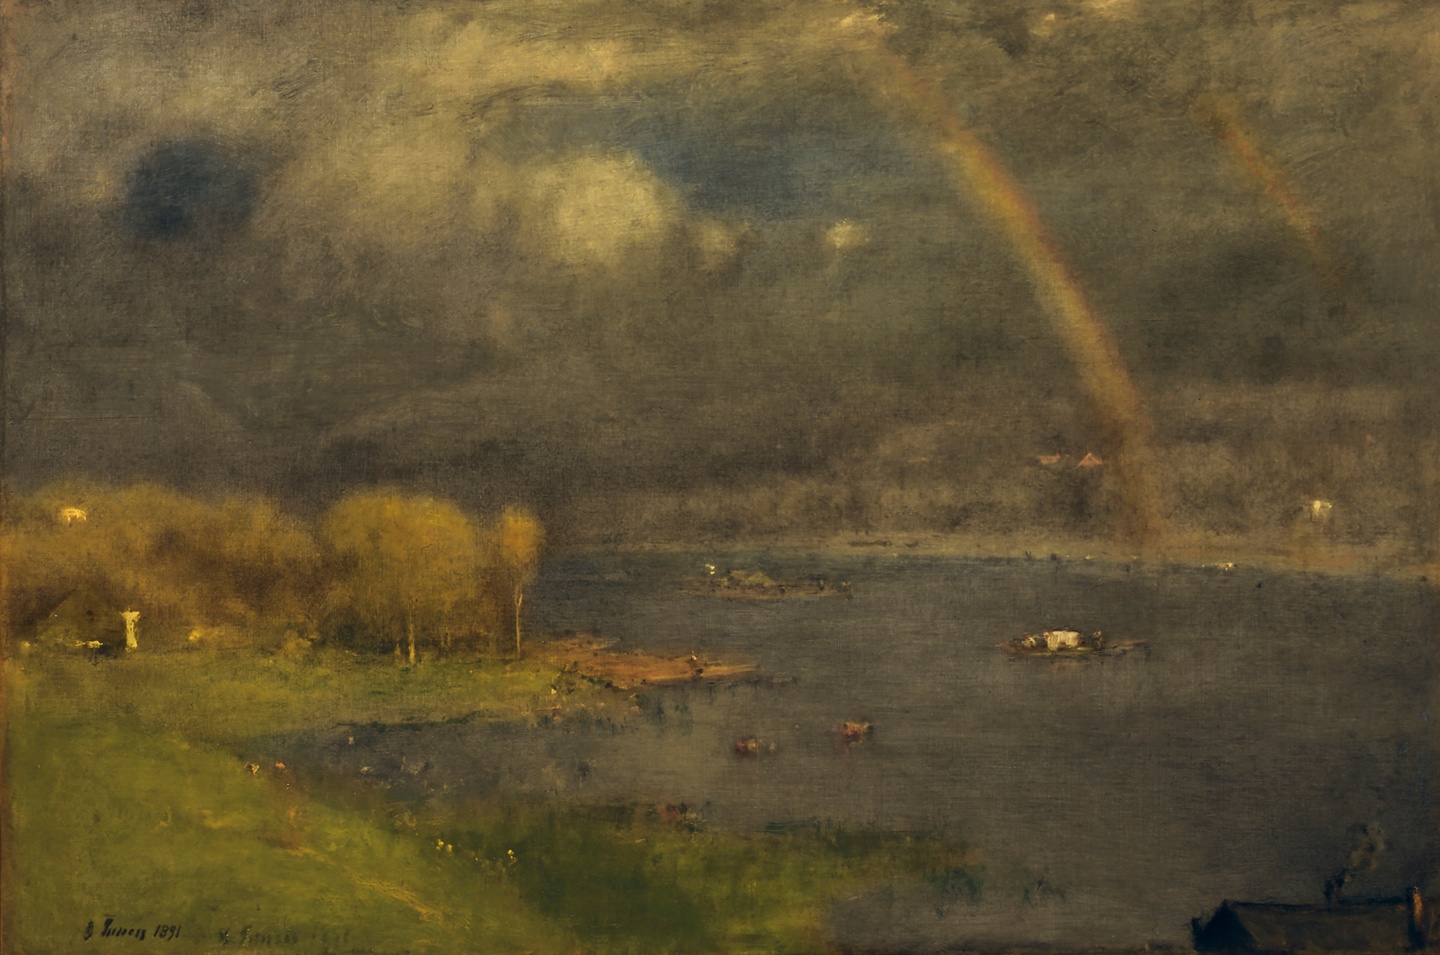 A painting of a landscape, including a small house in the foreground, a river, a cloudy sky, and a rainbow